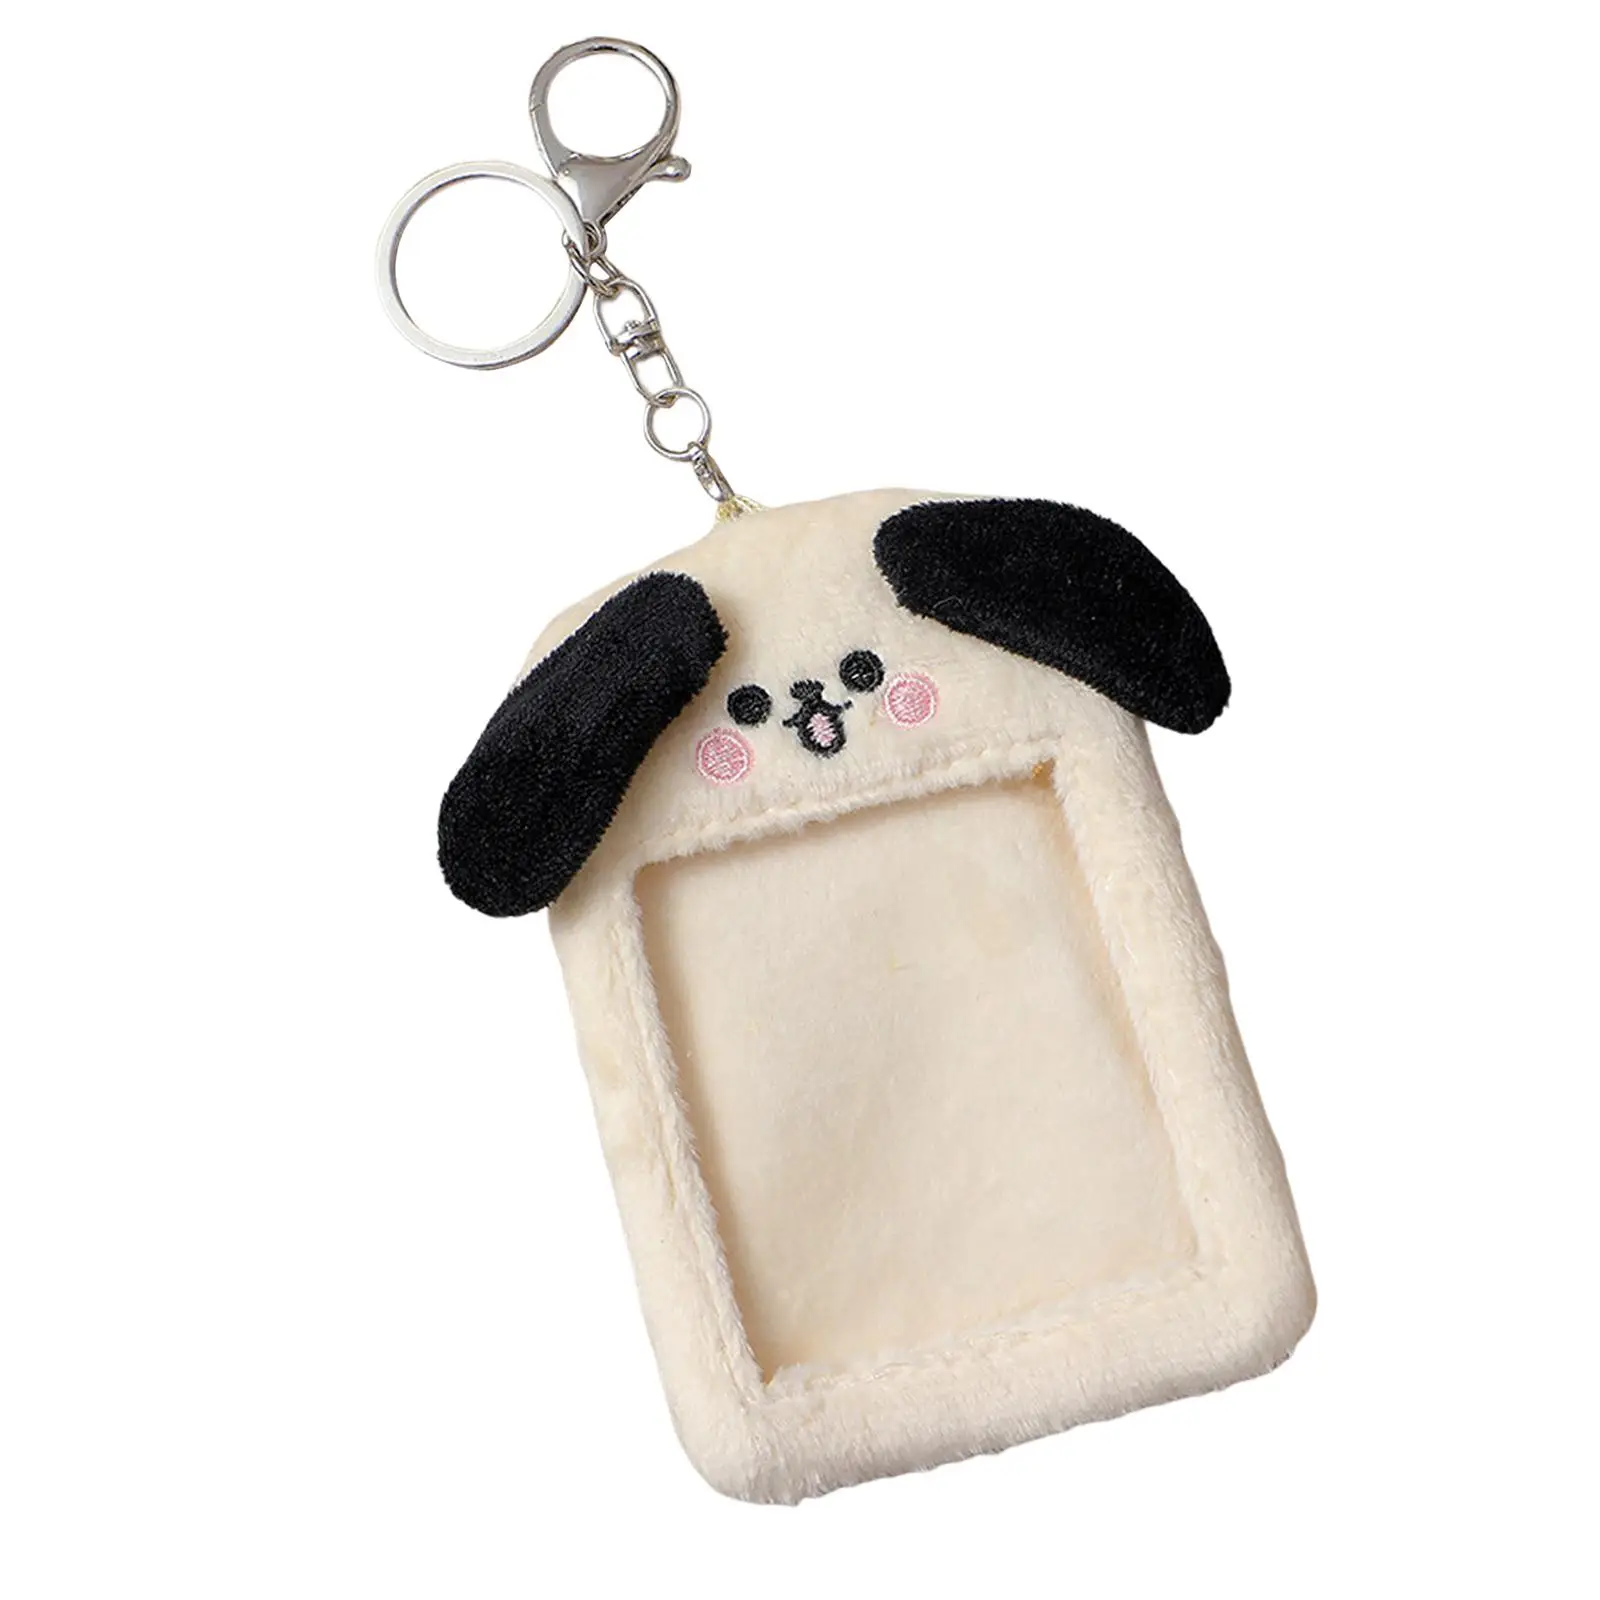 Soft Plush Photocard Holder Keychain Lobster Clasp Cute Animals for Picture